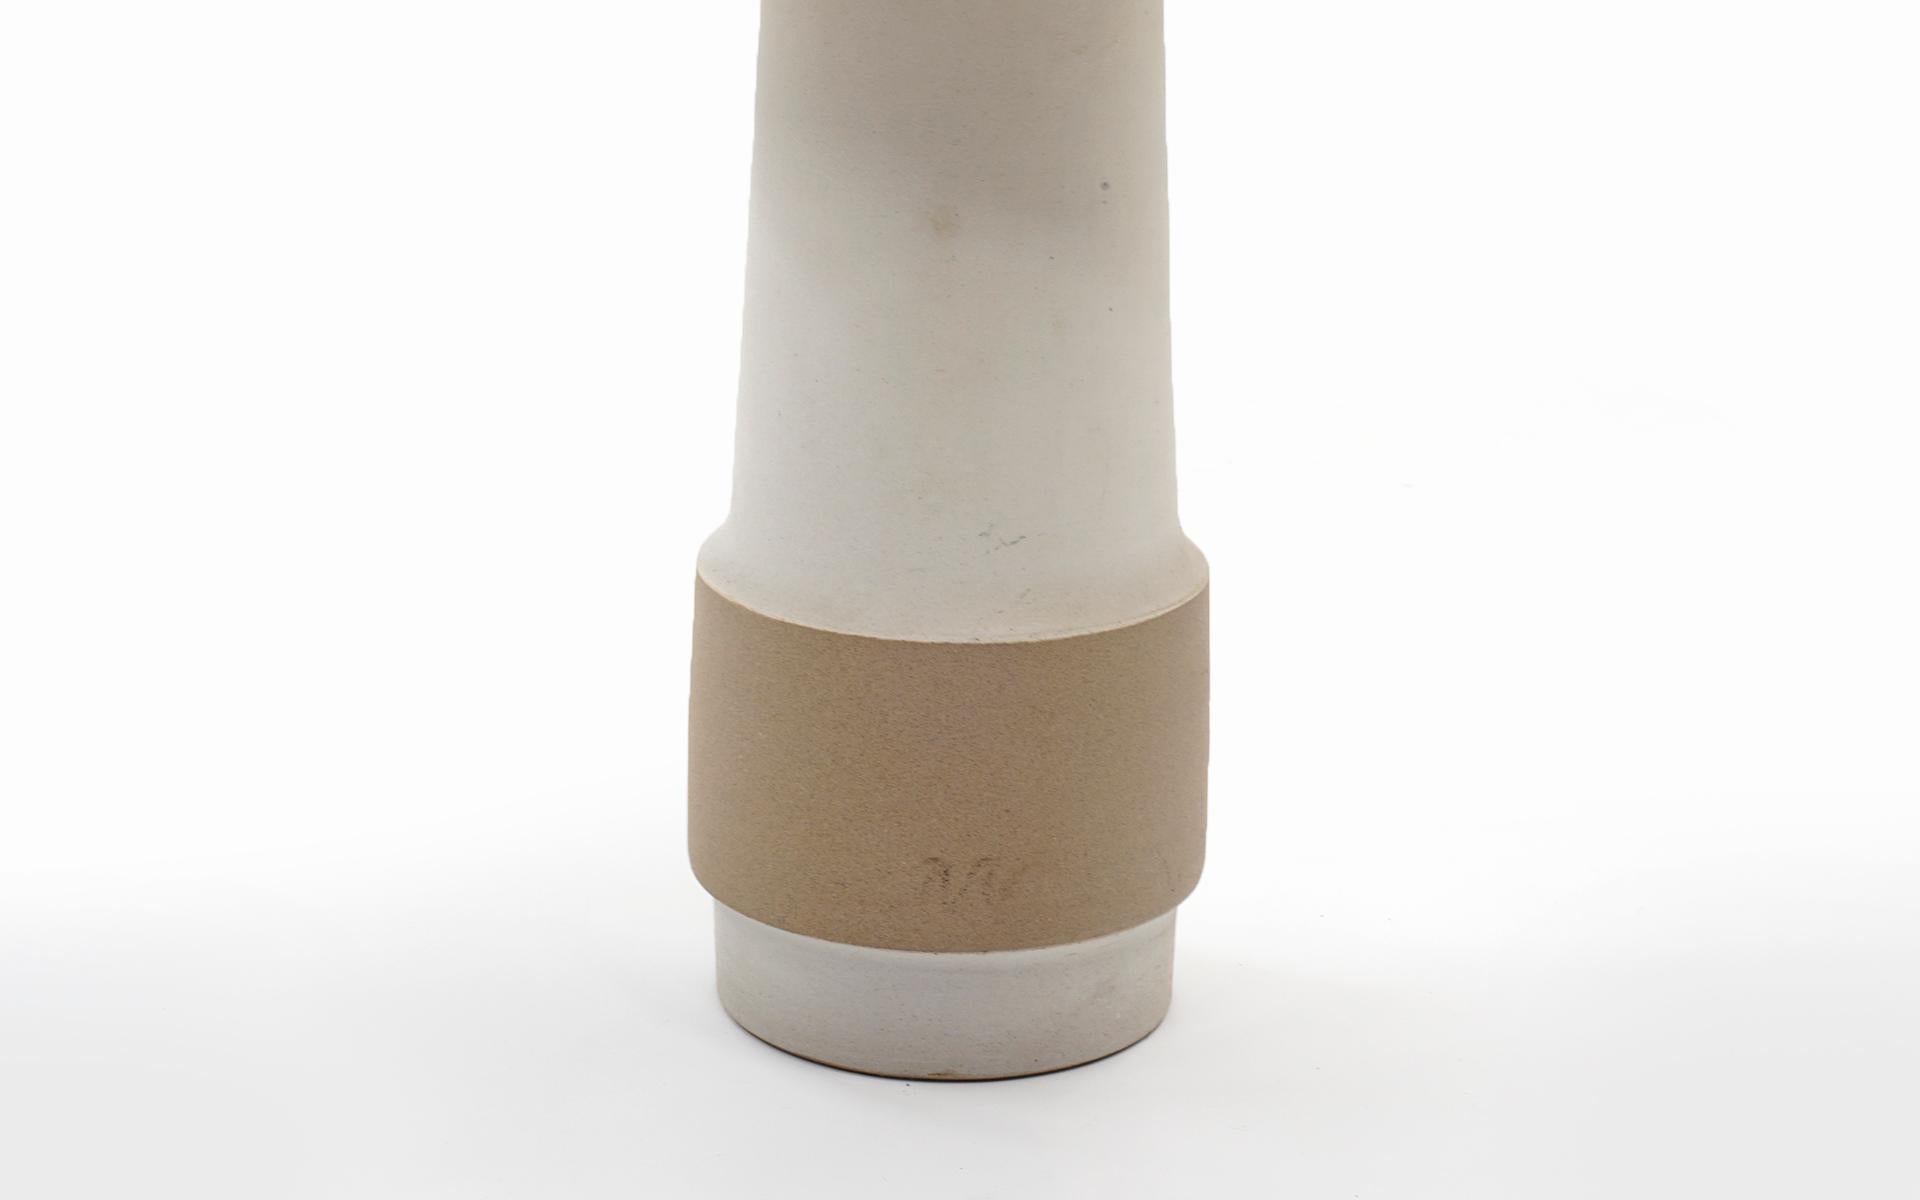 Mid-Century Modern Ceramic Table Lamp in White and Taupe by Gordon Martz, Signed, All Original